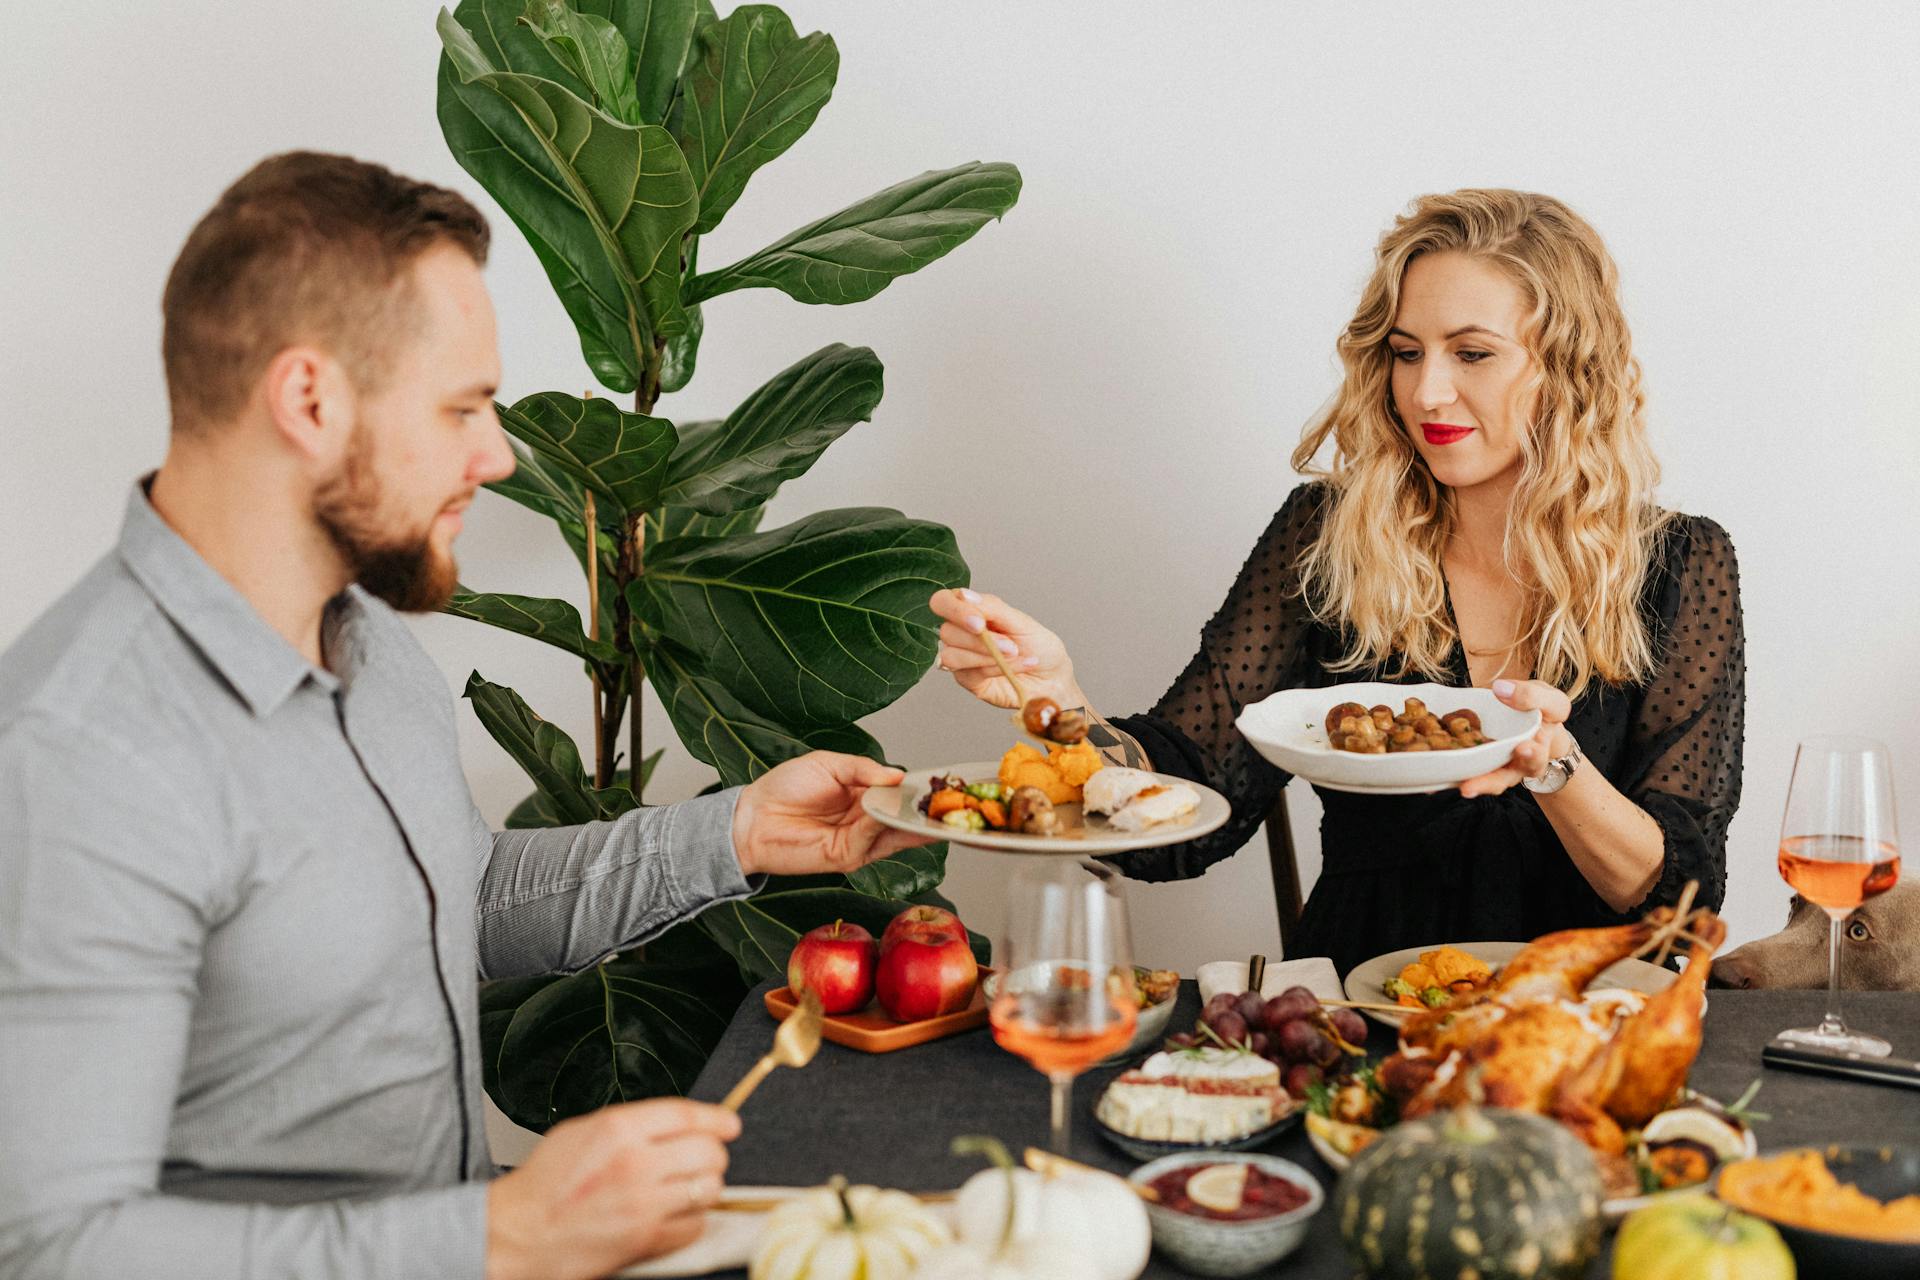 A couple sitting and eating together | Source: Pexels